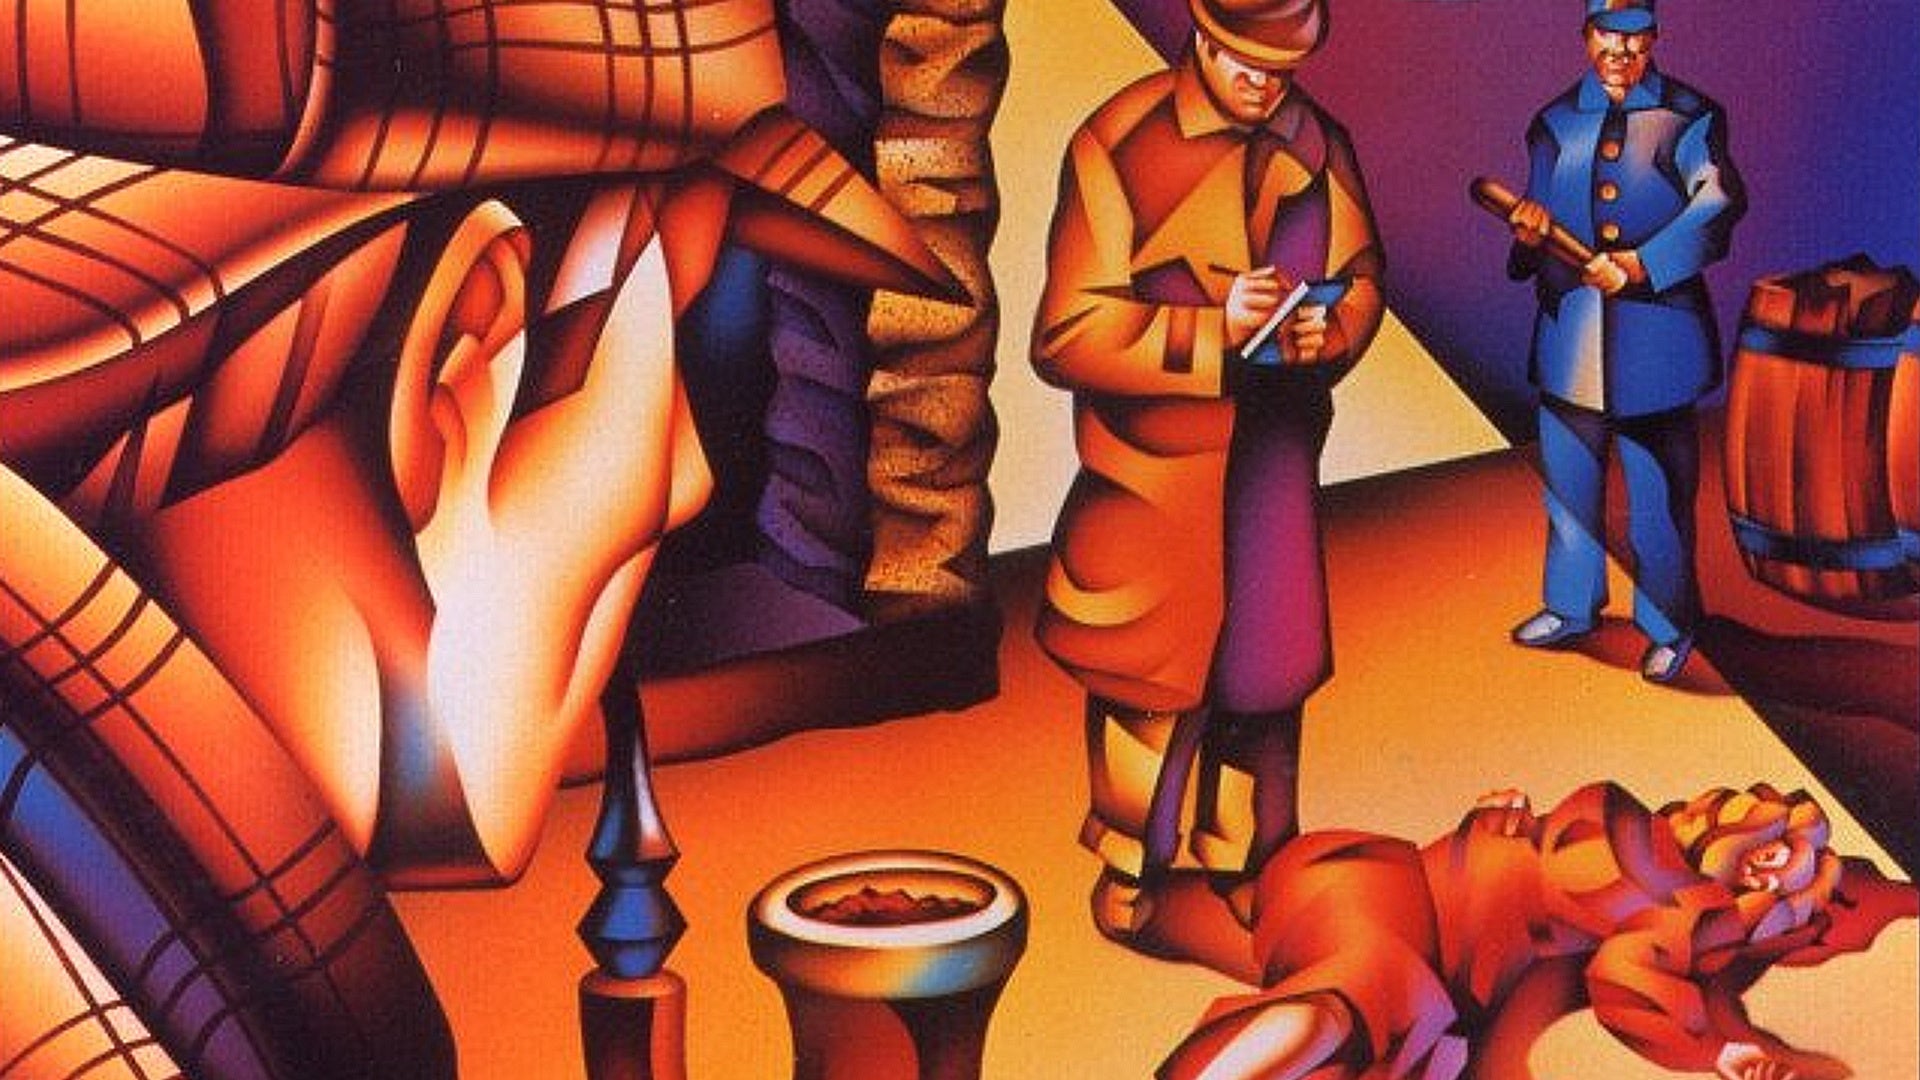 The Lost Files Of Sherlock Holmes: The Case Of The Serrated Scalpel is an adventure game developed by Mythos Software and published by EA in 1992.